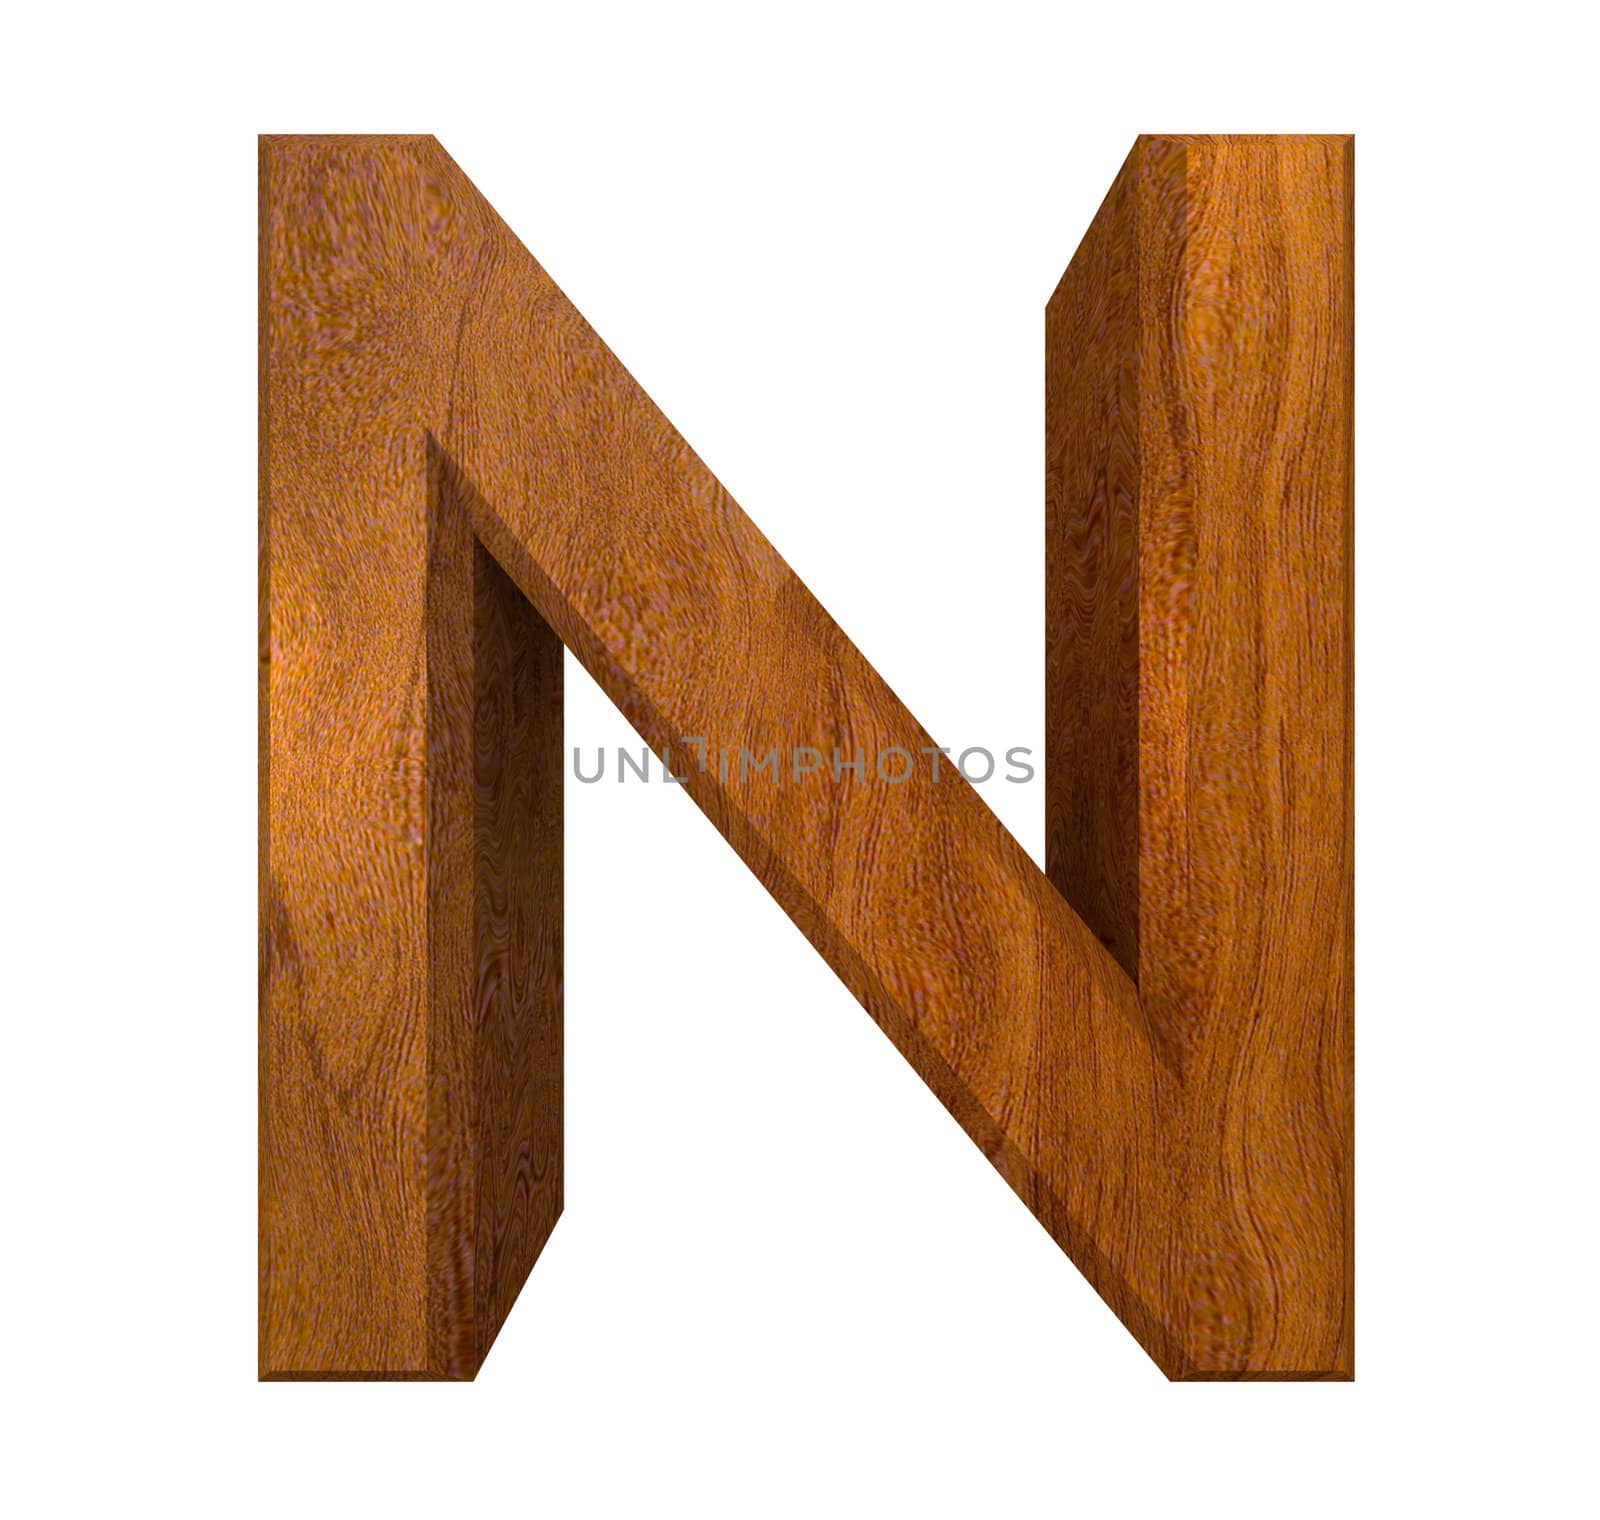 3d letter N in wood - 3d made